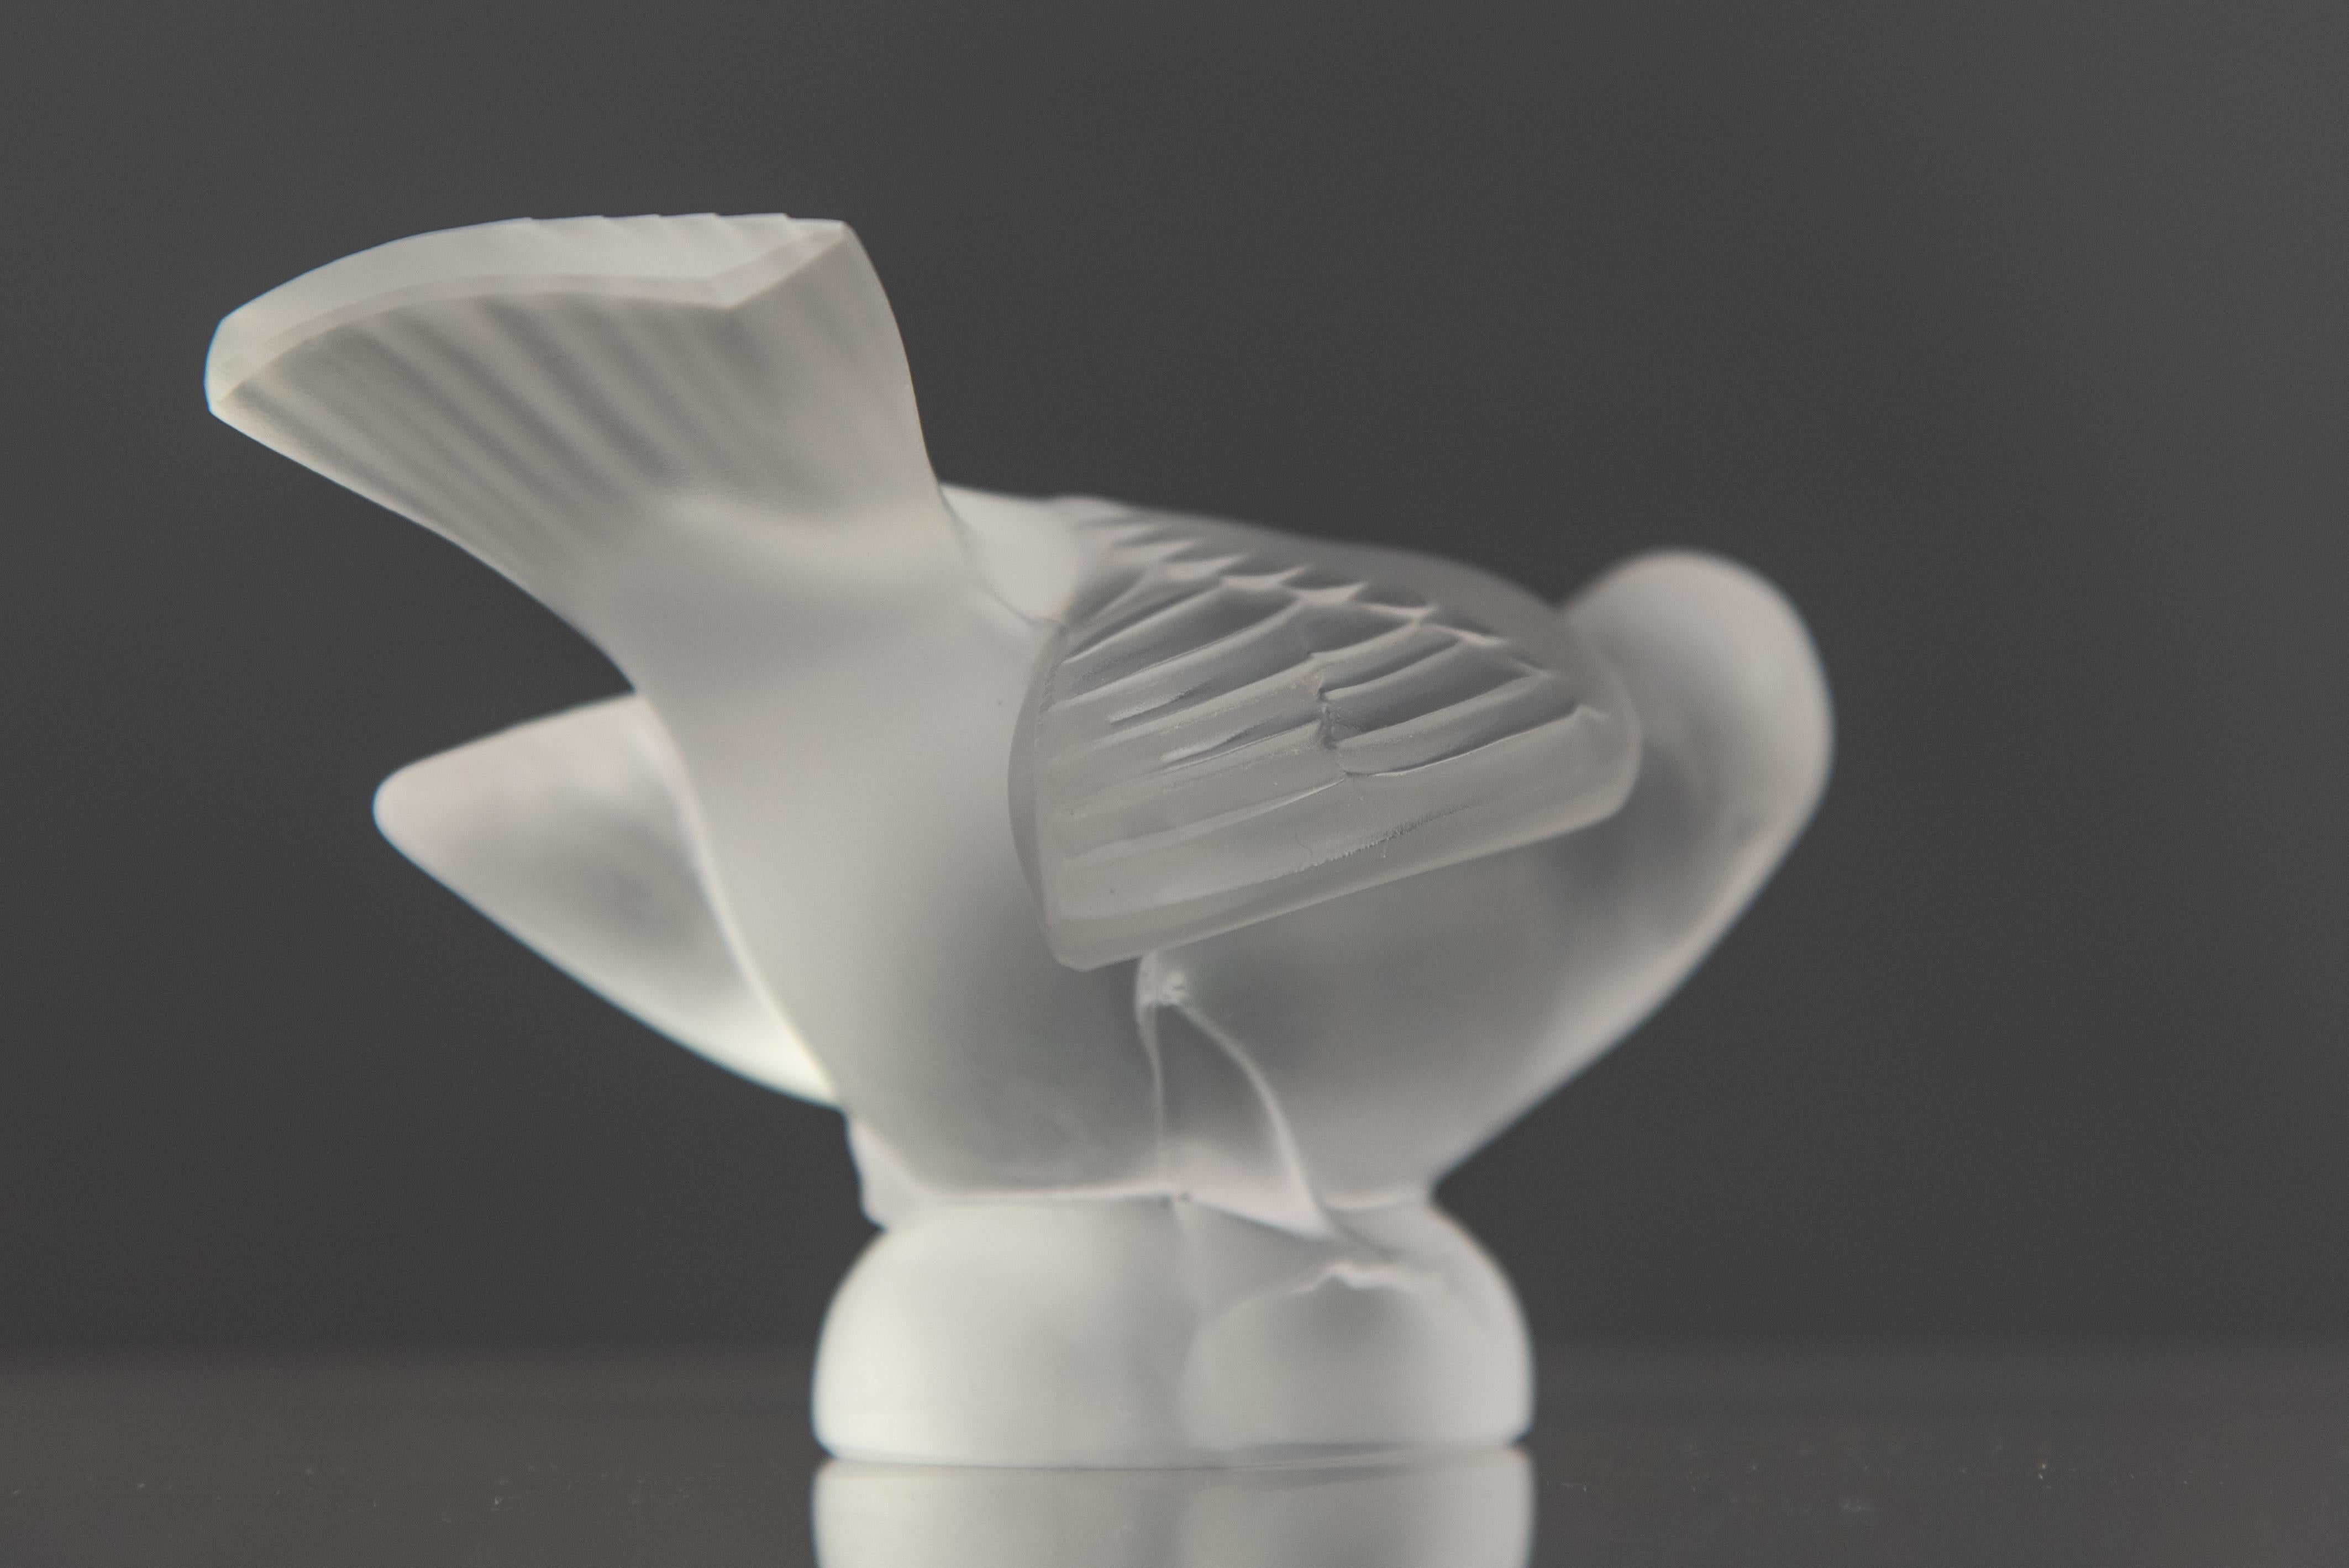 Vintage crystal Moineau Coquet bird’s series sculpture by René Lalique
France, 1970s
Signed at the base Lalique@France
Serial number 1160500
Original box included
Perfect conditions
Every item of our Gallery, upon request, is accompanied by a